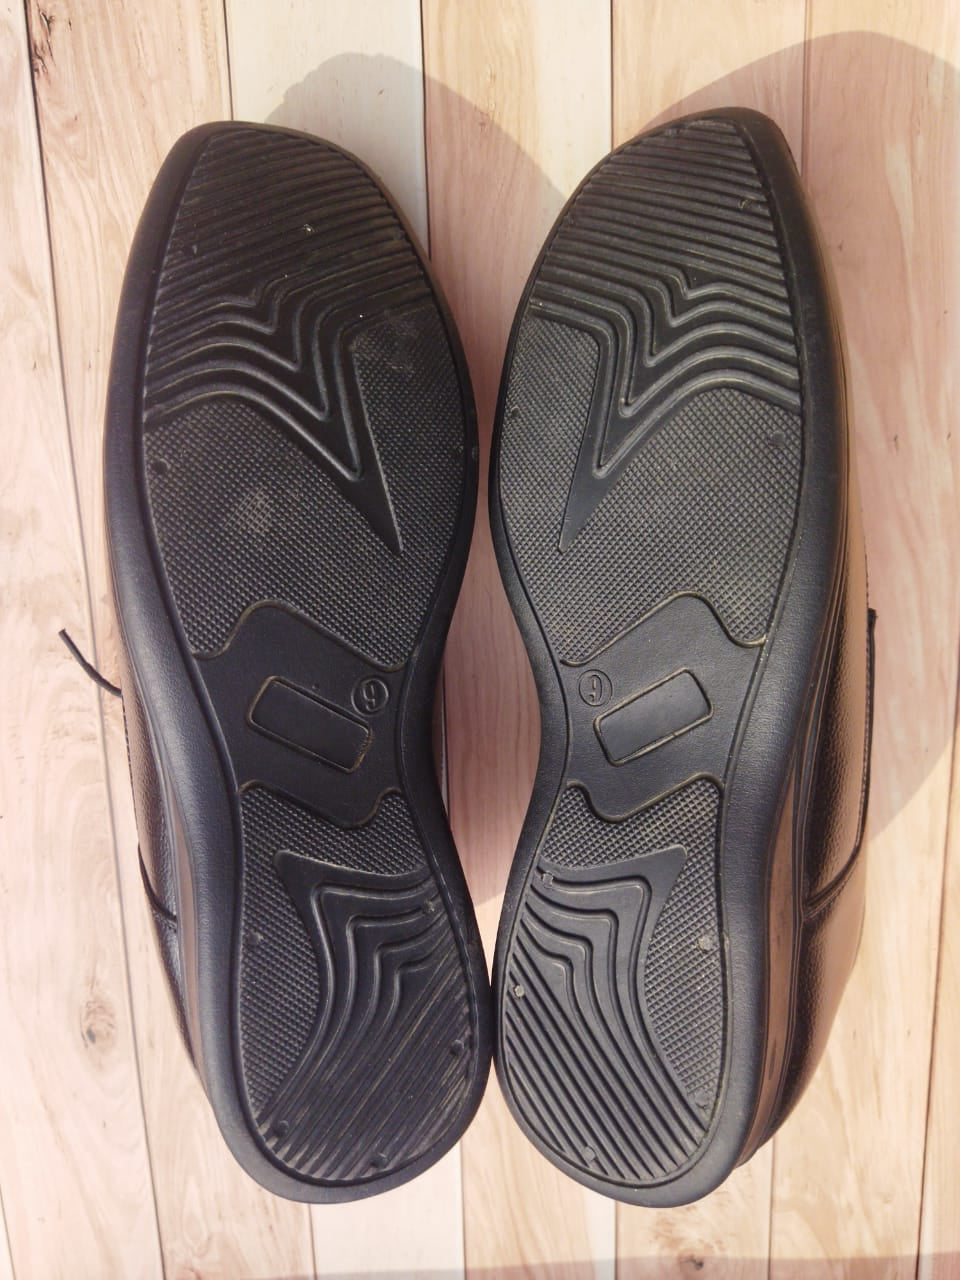 Black Formal Shoes -Used